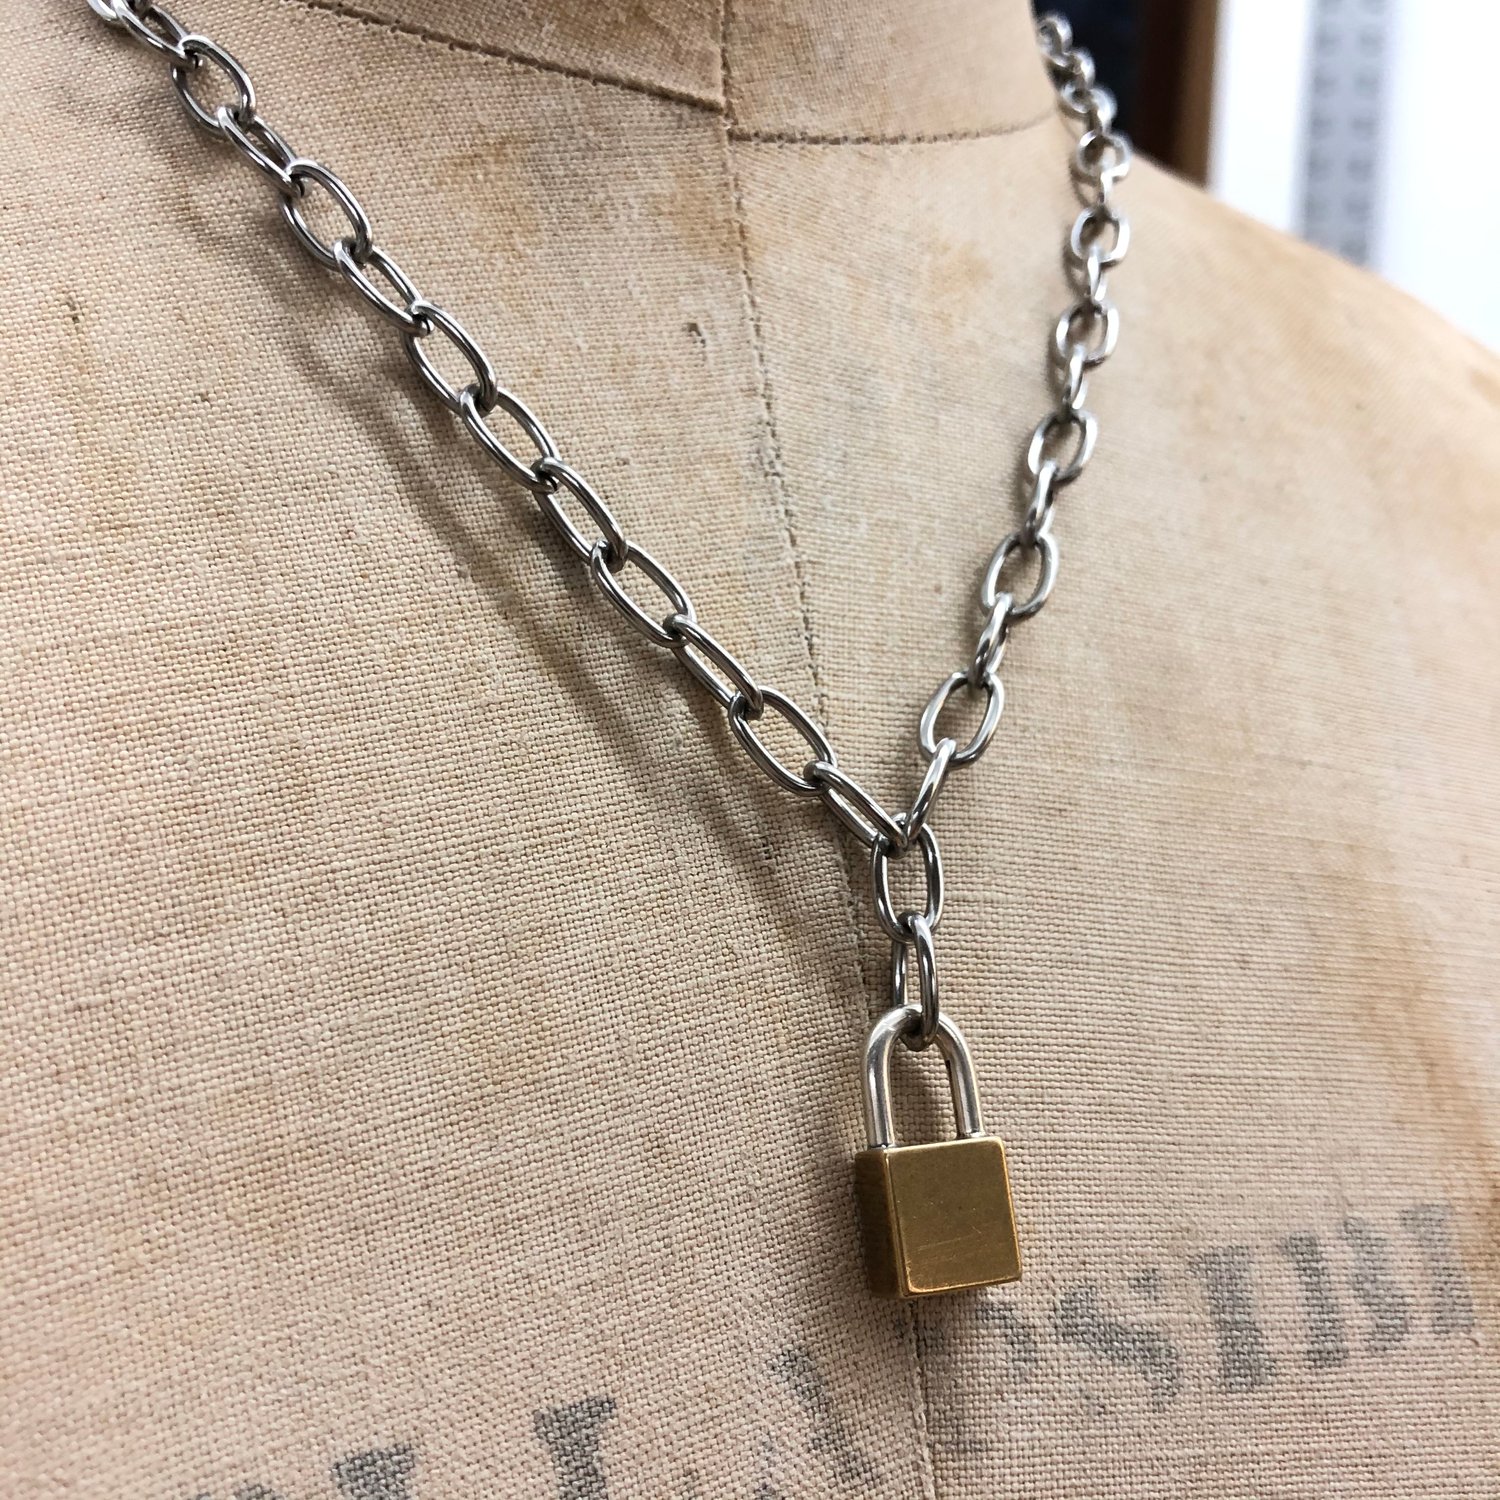 Local Pitara Big Lock Chain Necklace Stainless Steel Necklace